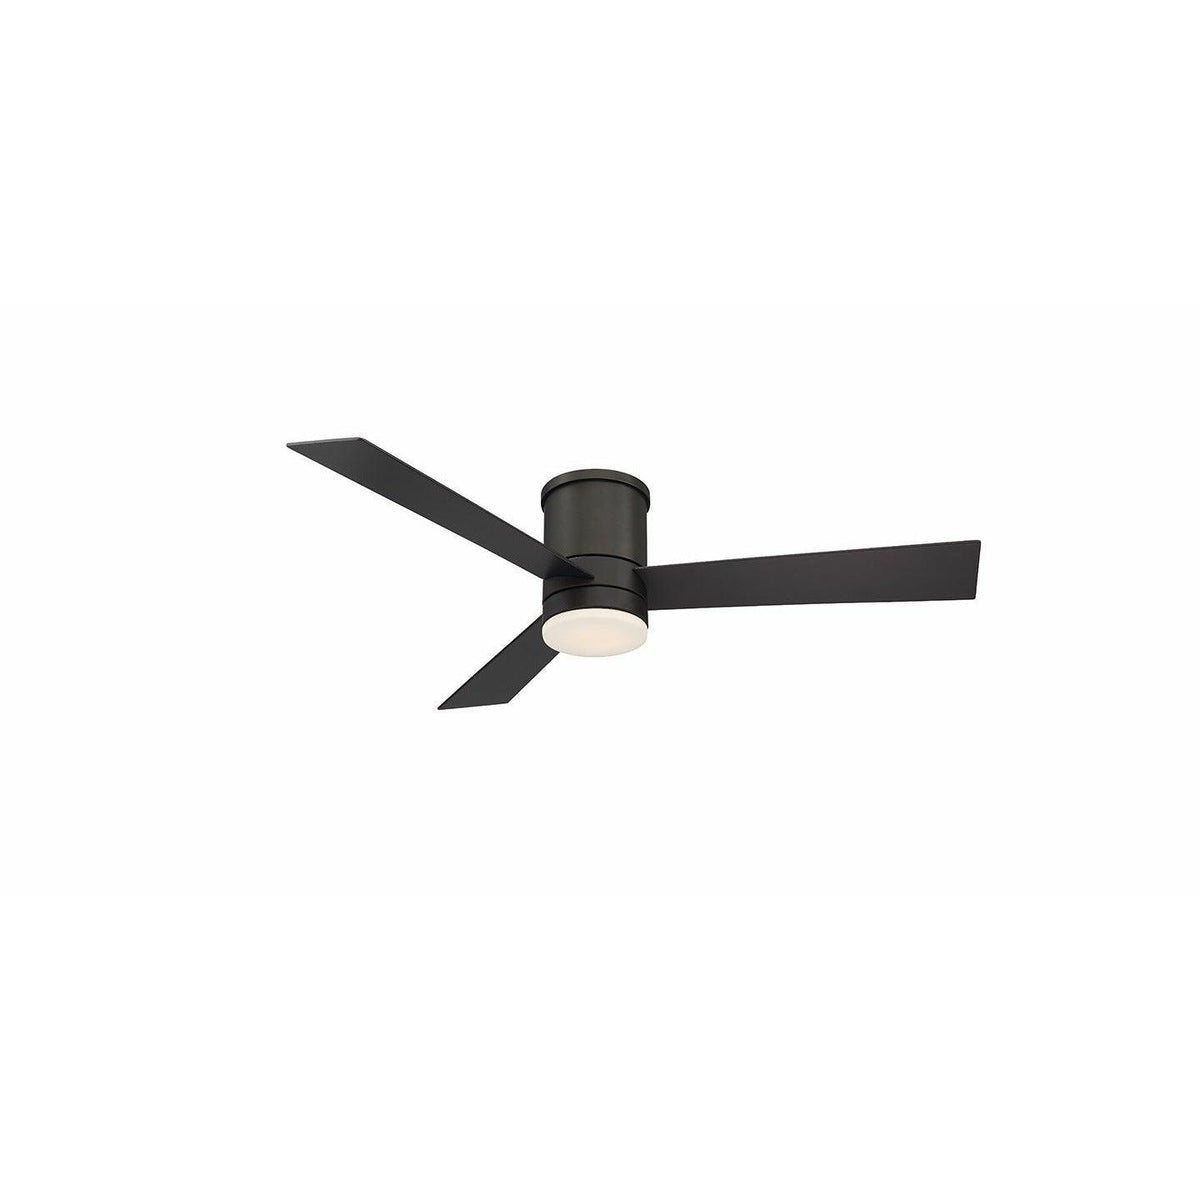 Modern Forms - Axis Flush Ceiling Fan - FH-W1803-52L-BZ | Montreal Lighting & Hardware